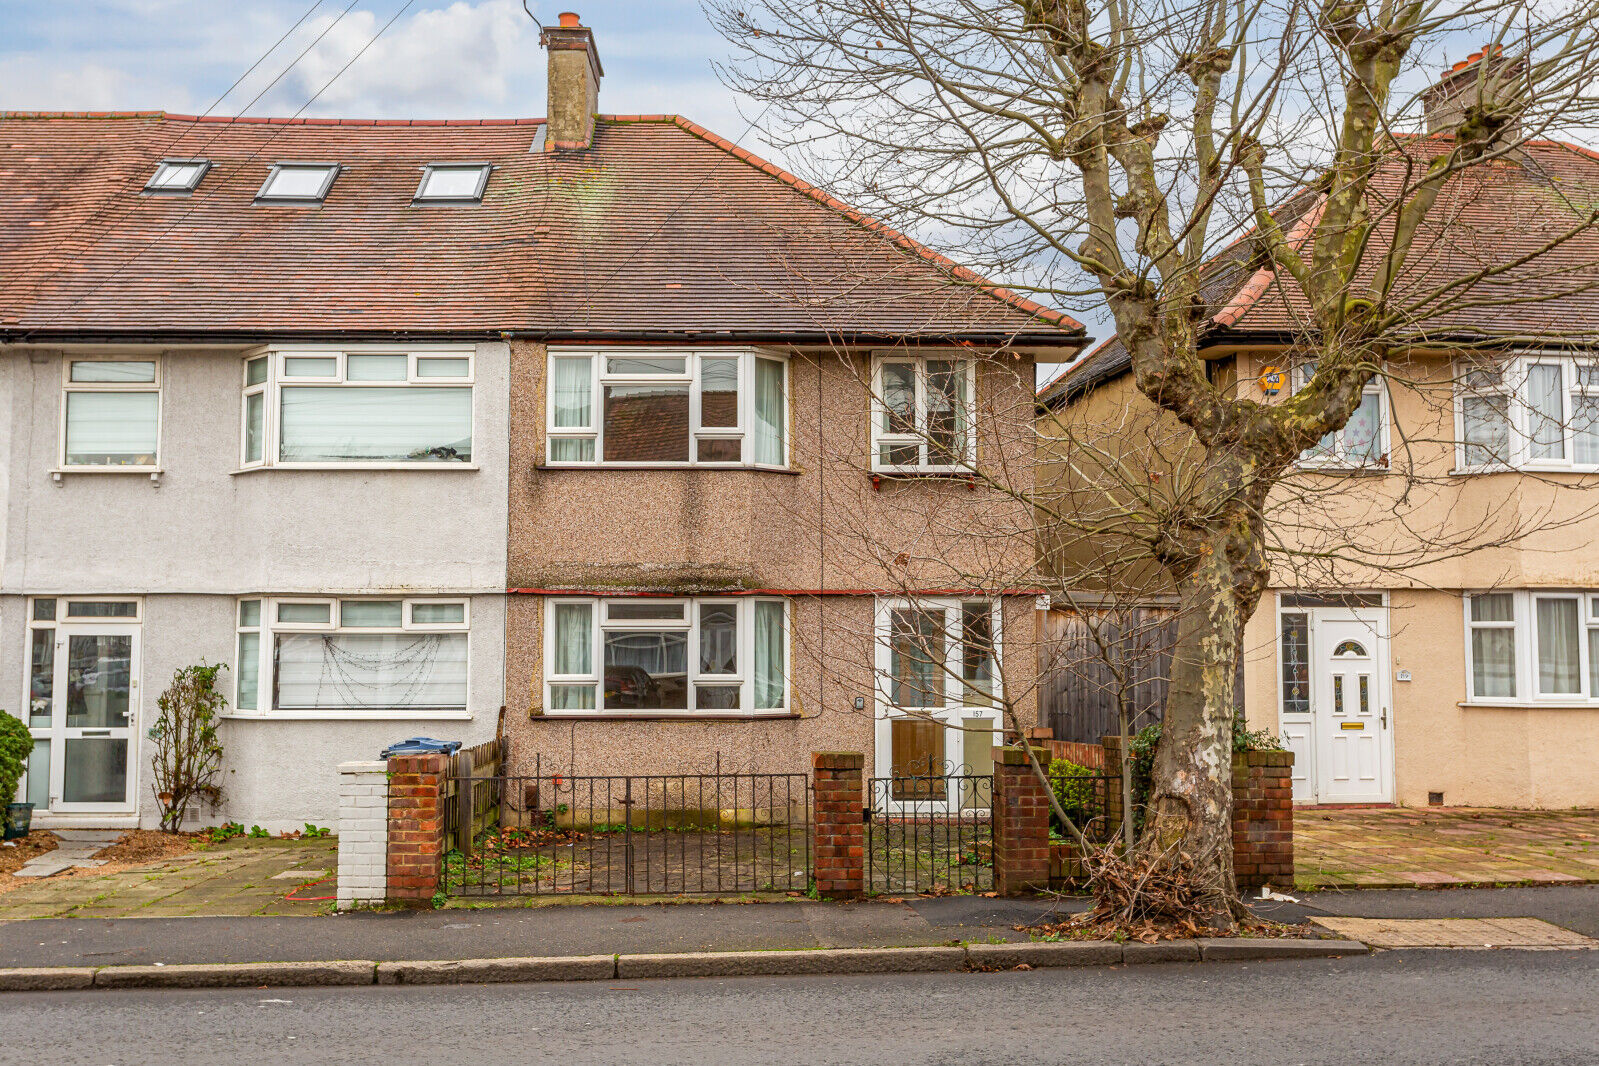 3 bedroom end terraced house for sale Grove Road, Mitcham, CR4, main image